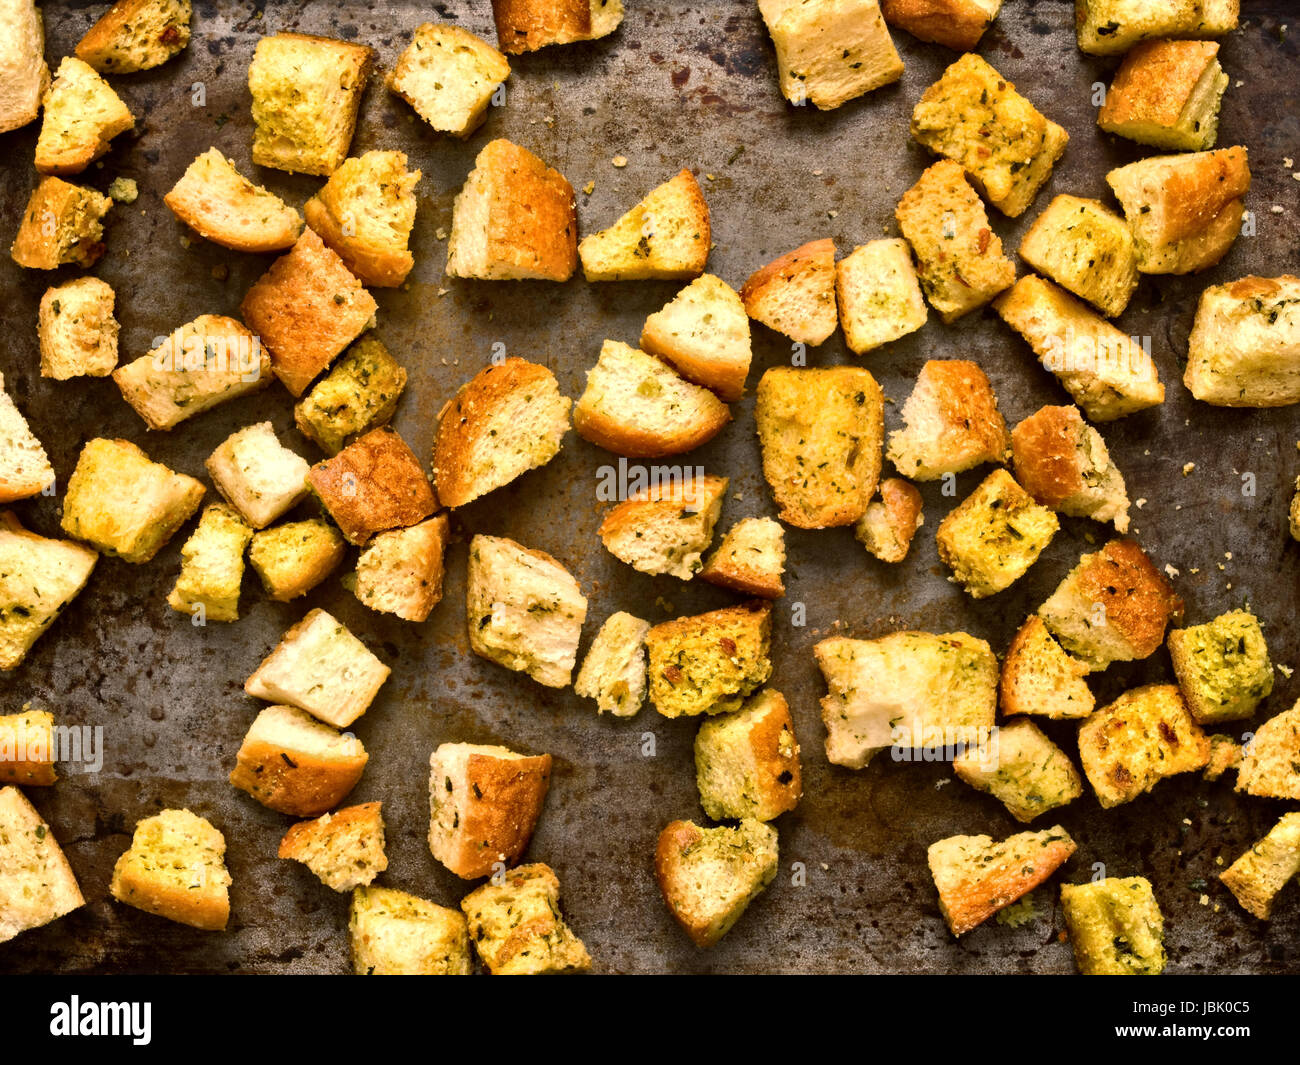 close up of rustic homemade baked croutons Stock Photo